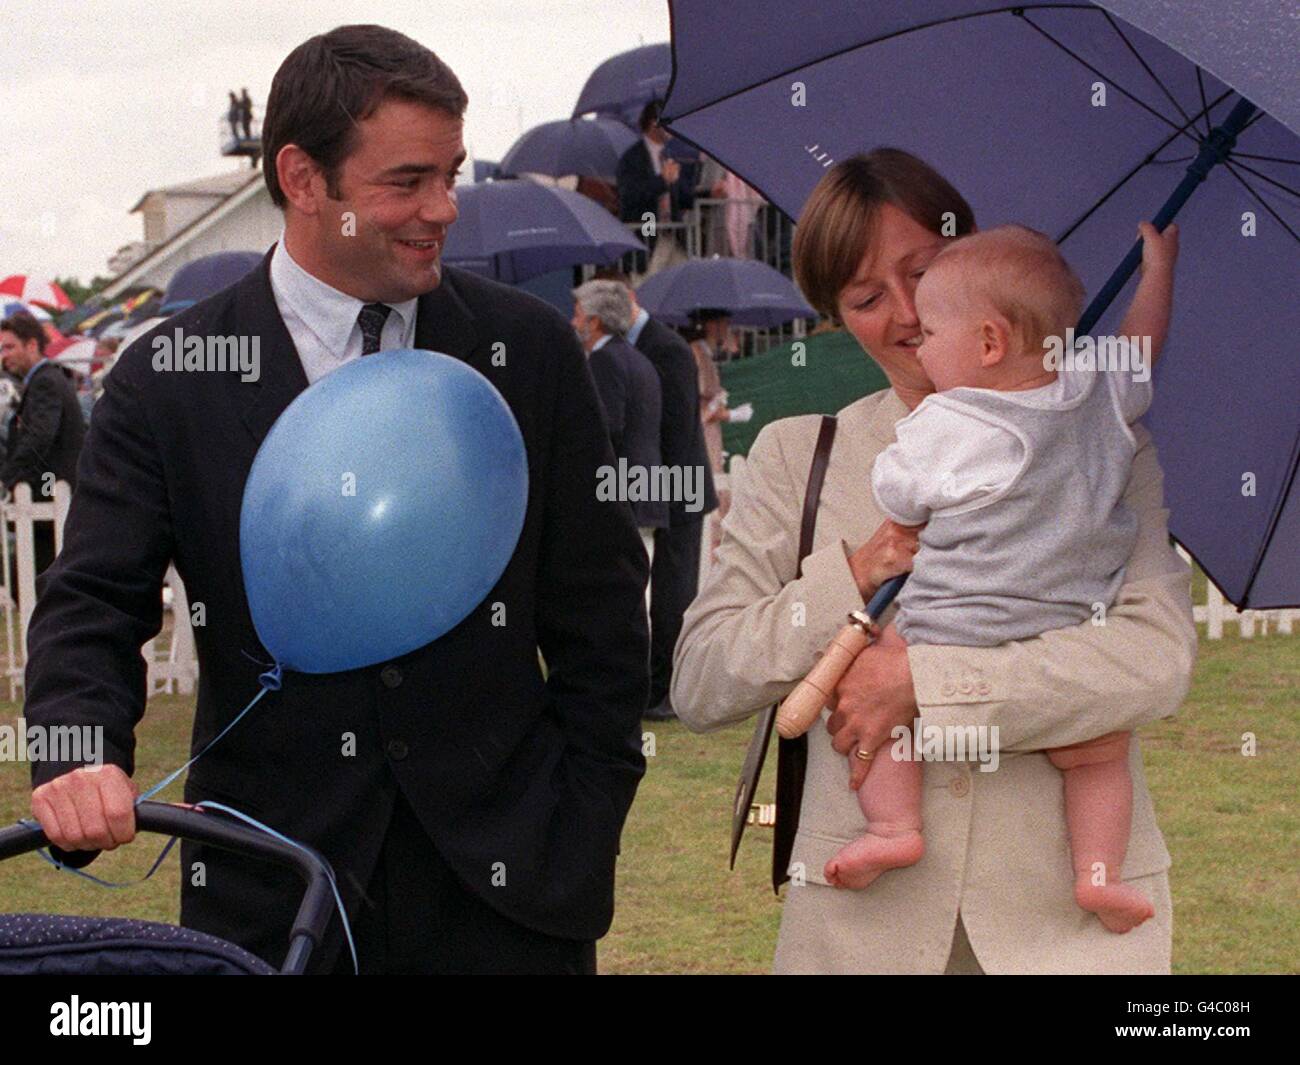 Former England rugby captain Will Carling and his girlfriend Ali Cockayne and their nine-month-old son Henry, enjoying a day out at the Alfred Dunhill Queen's Cup Polo at Smith's Lawn, Windsor Great Park. Stock Photo